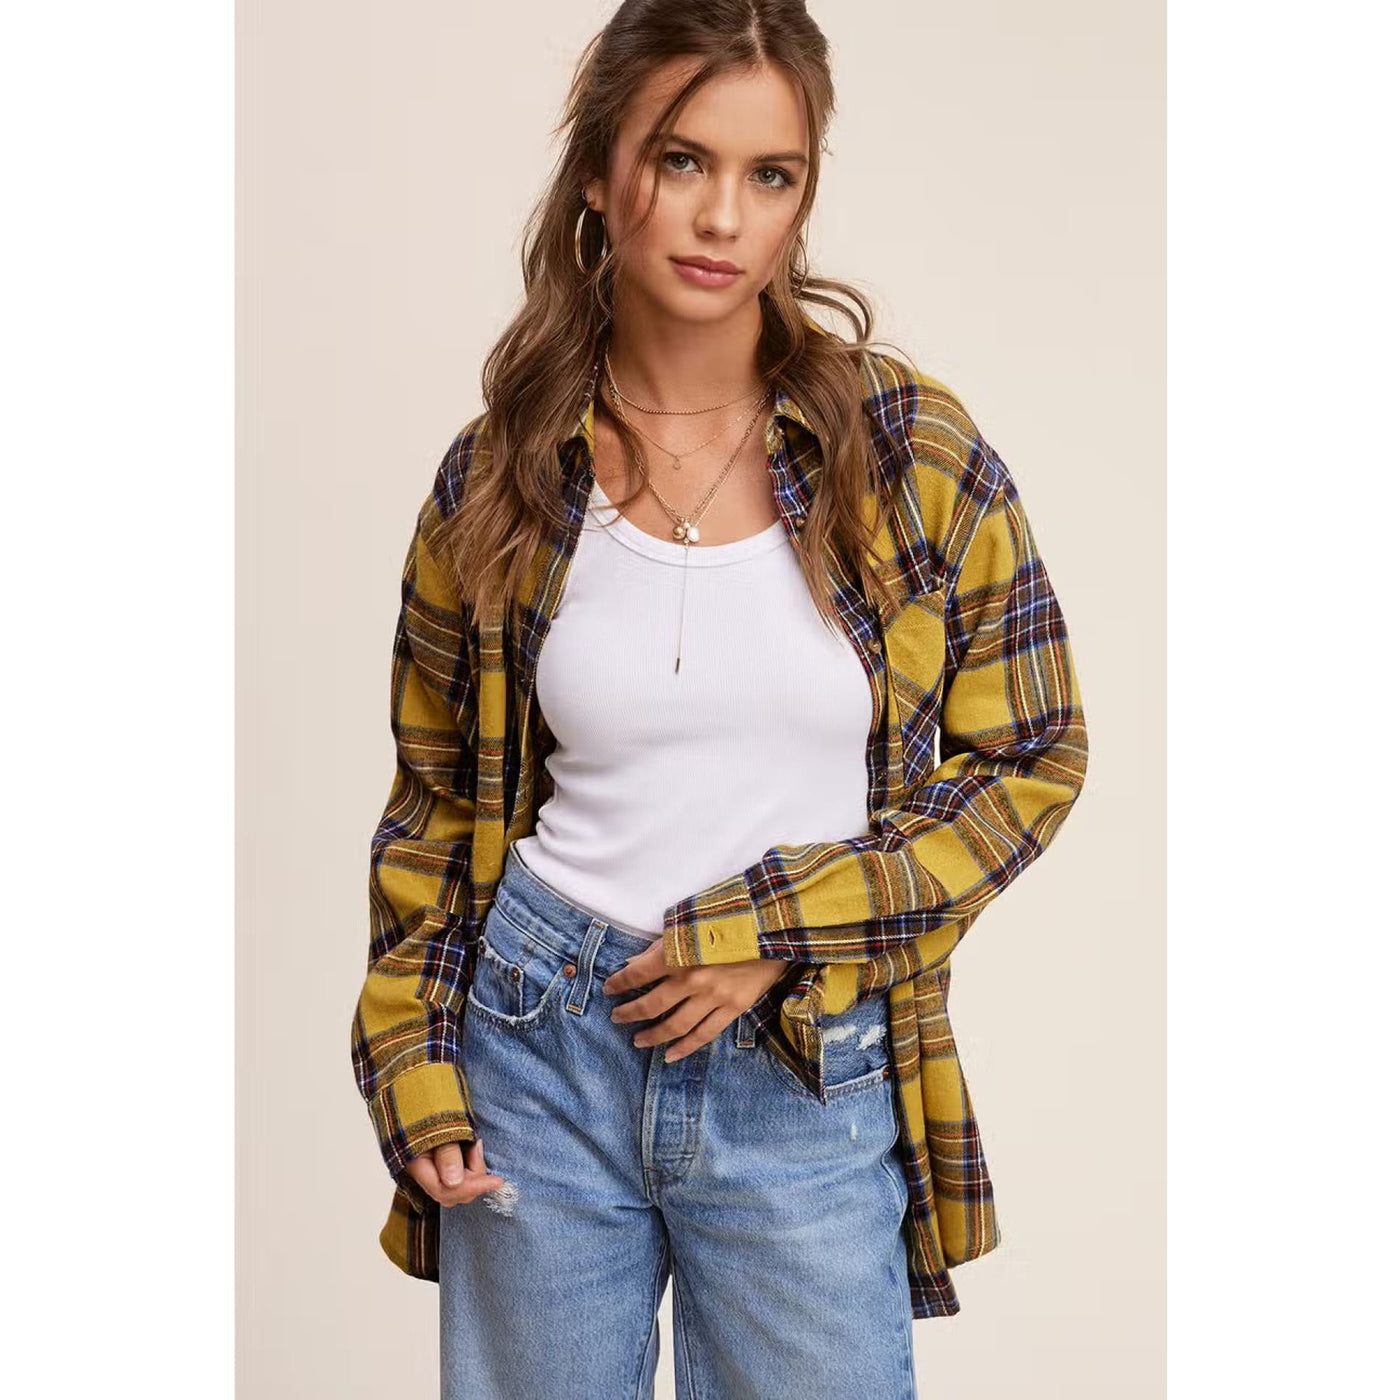 Stay Here Forever Plaid Flannel Top - 120 Long Sleeve Tops